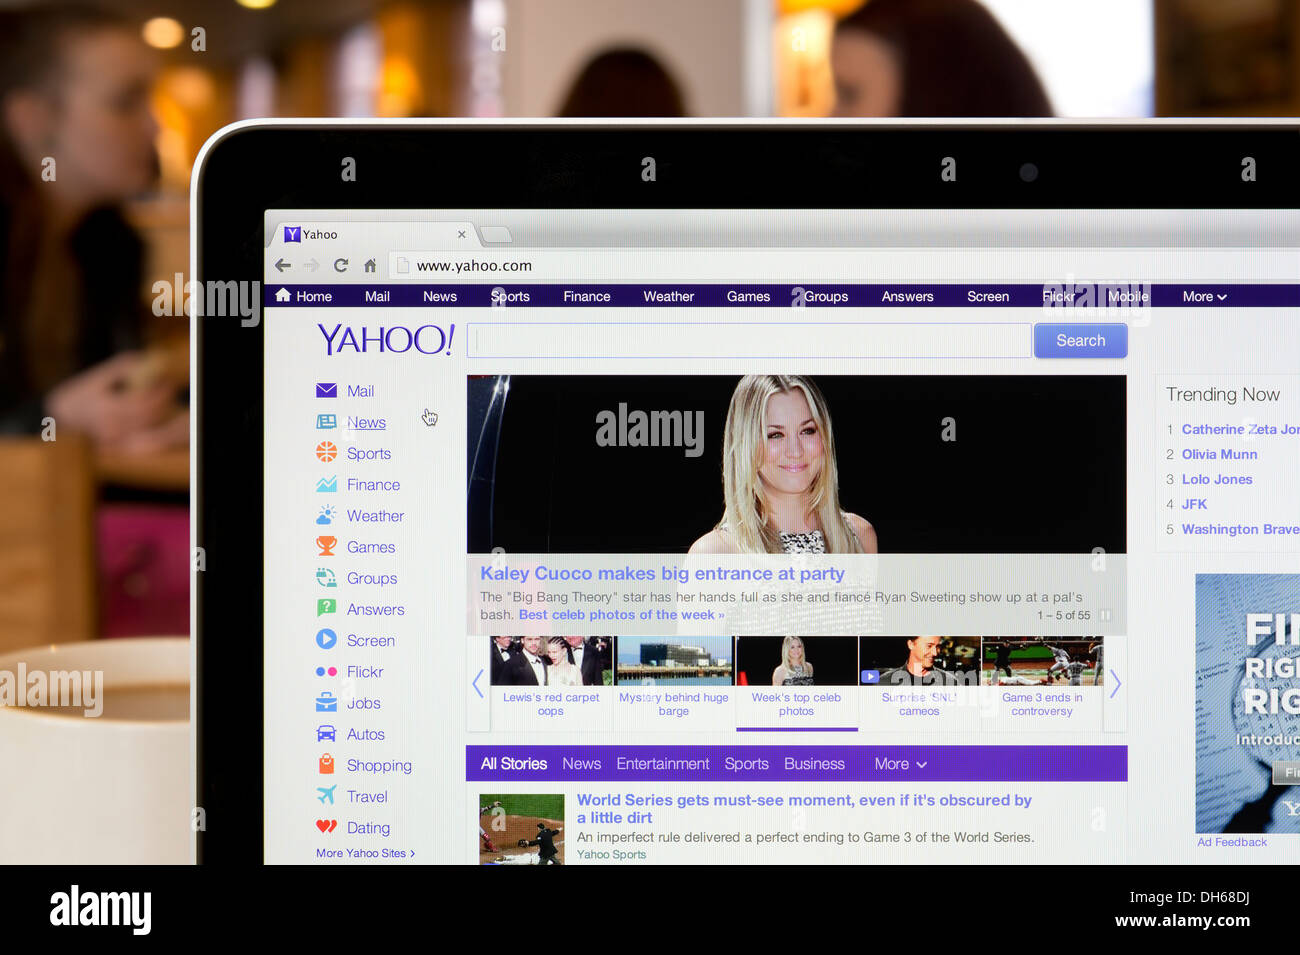 The Yahoo website shot in a coffee shop environment (Editorial use only: print, TV, e-book and editorial website). Stock Photo